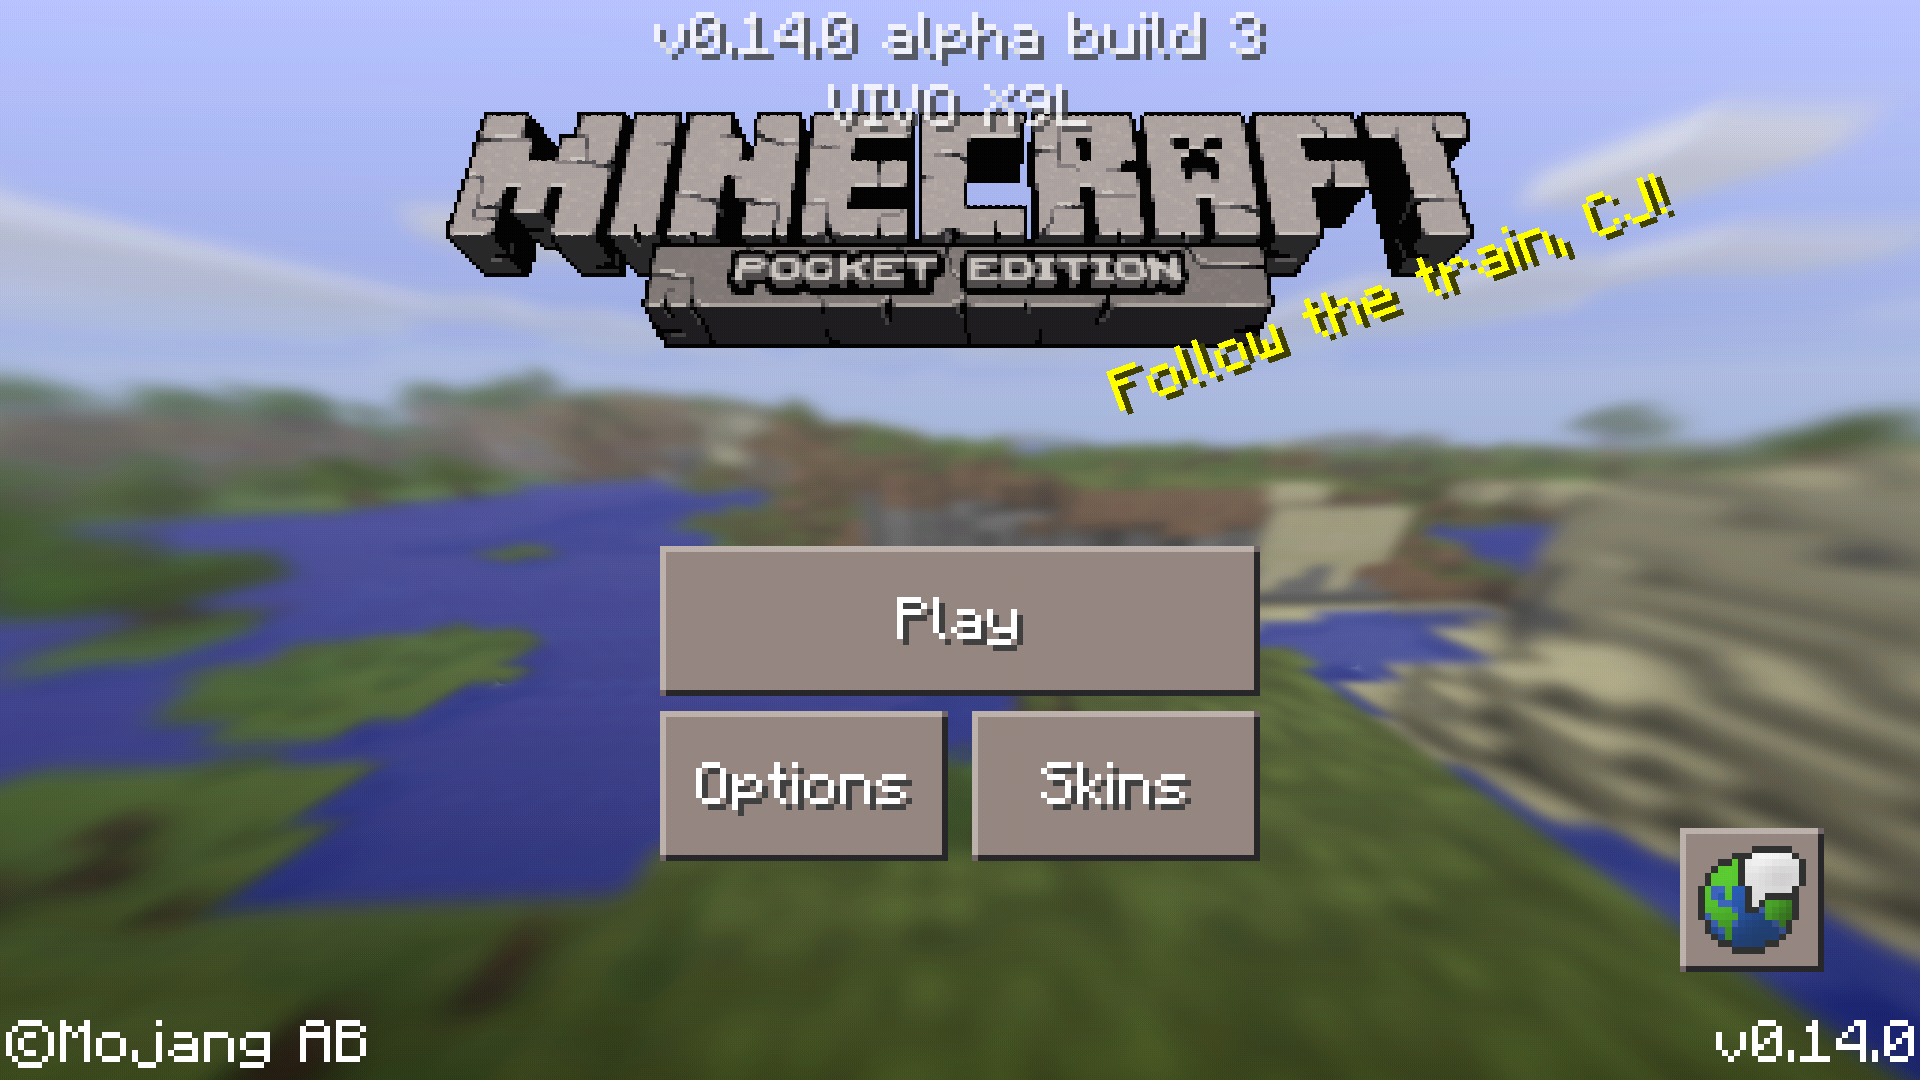 Minecraft mobile builds towards desktop version with latest update